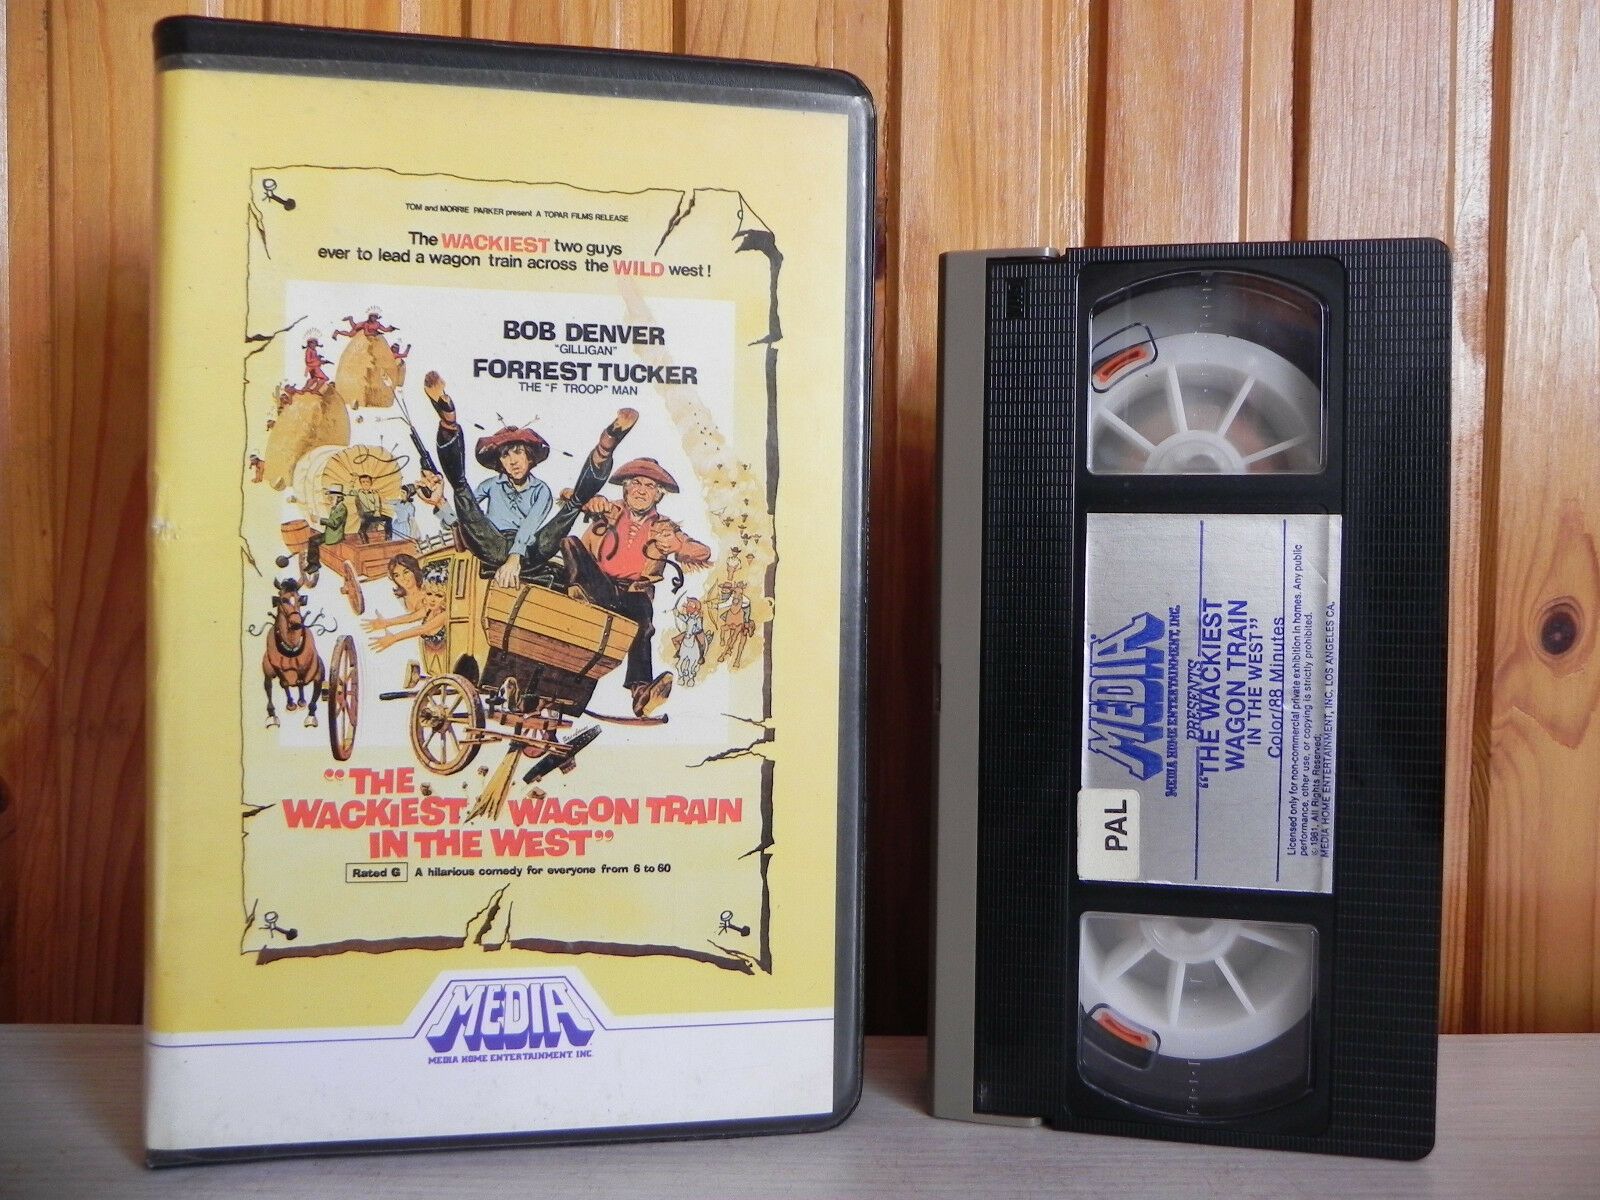 The Wackiest Wagon Ride In The West - Media - Big Box - Pre Cert VHS (365)-